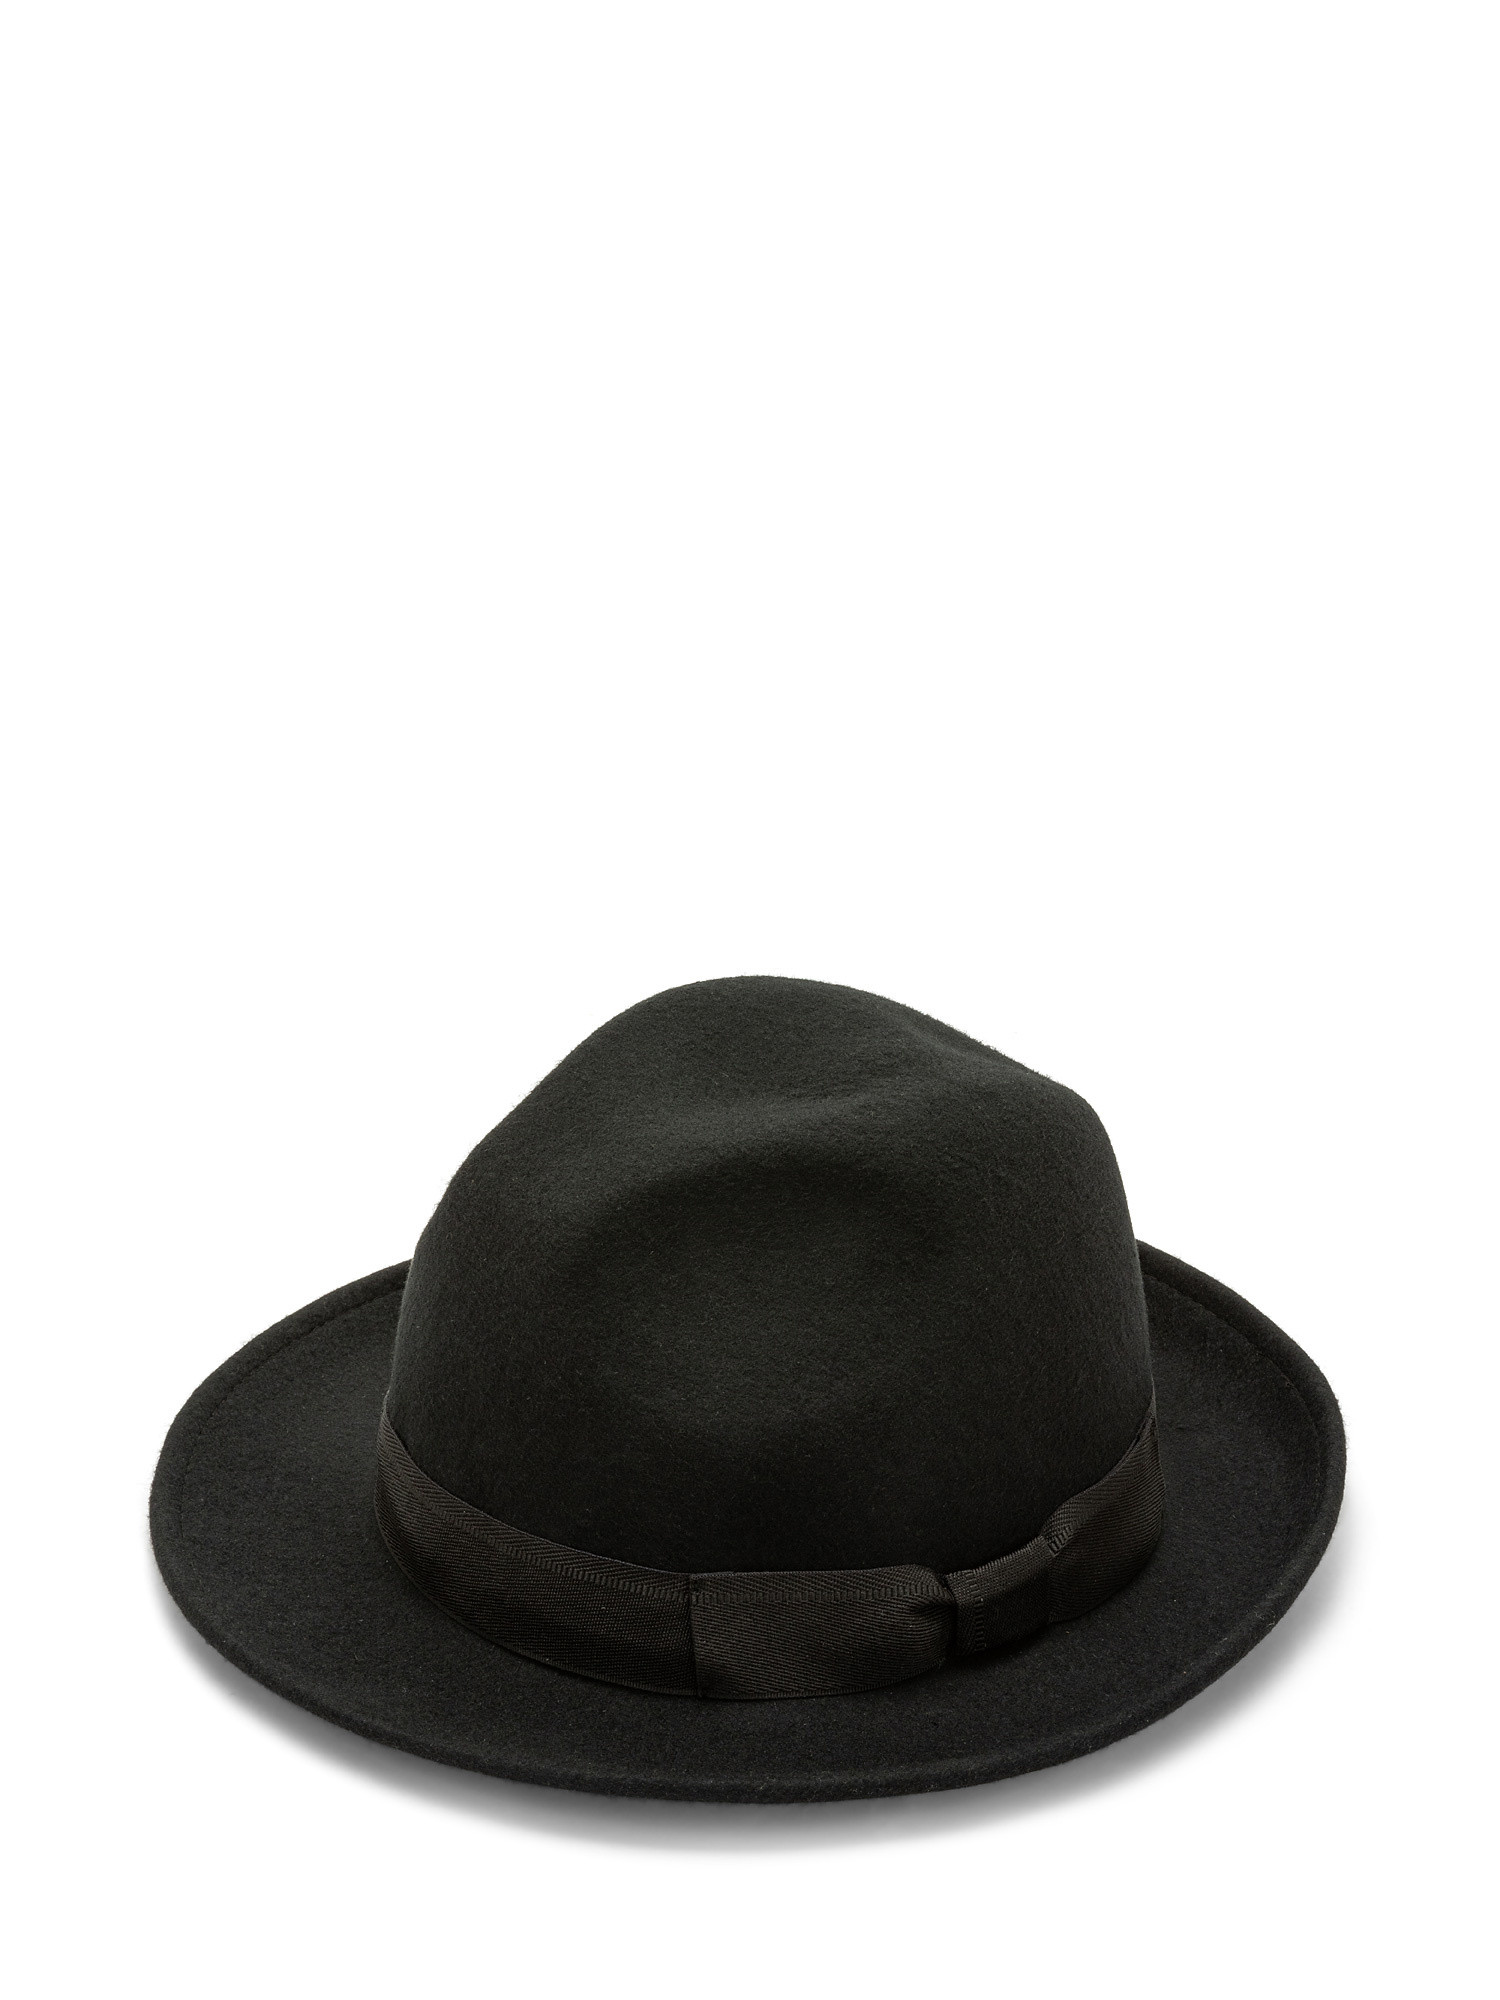 Cappello loden, Nero, large image number 0